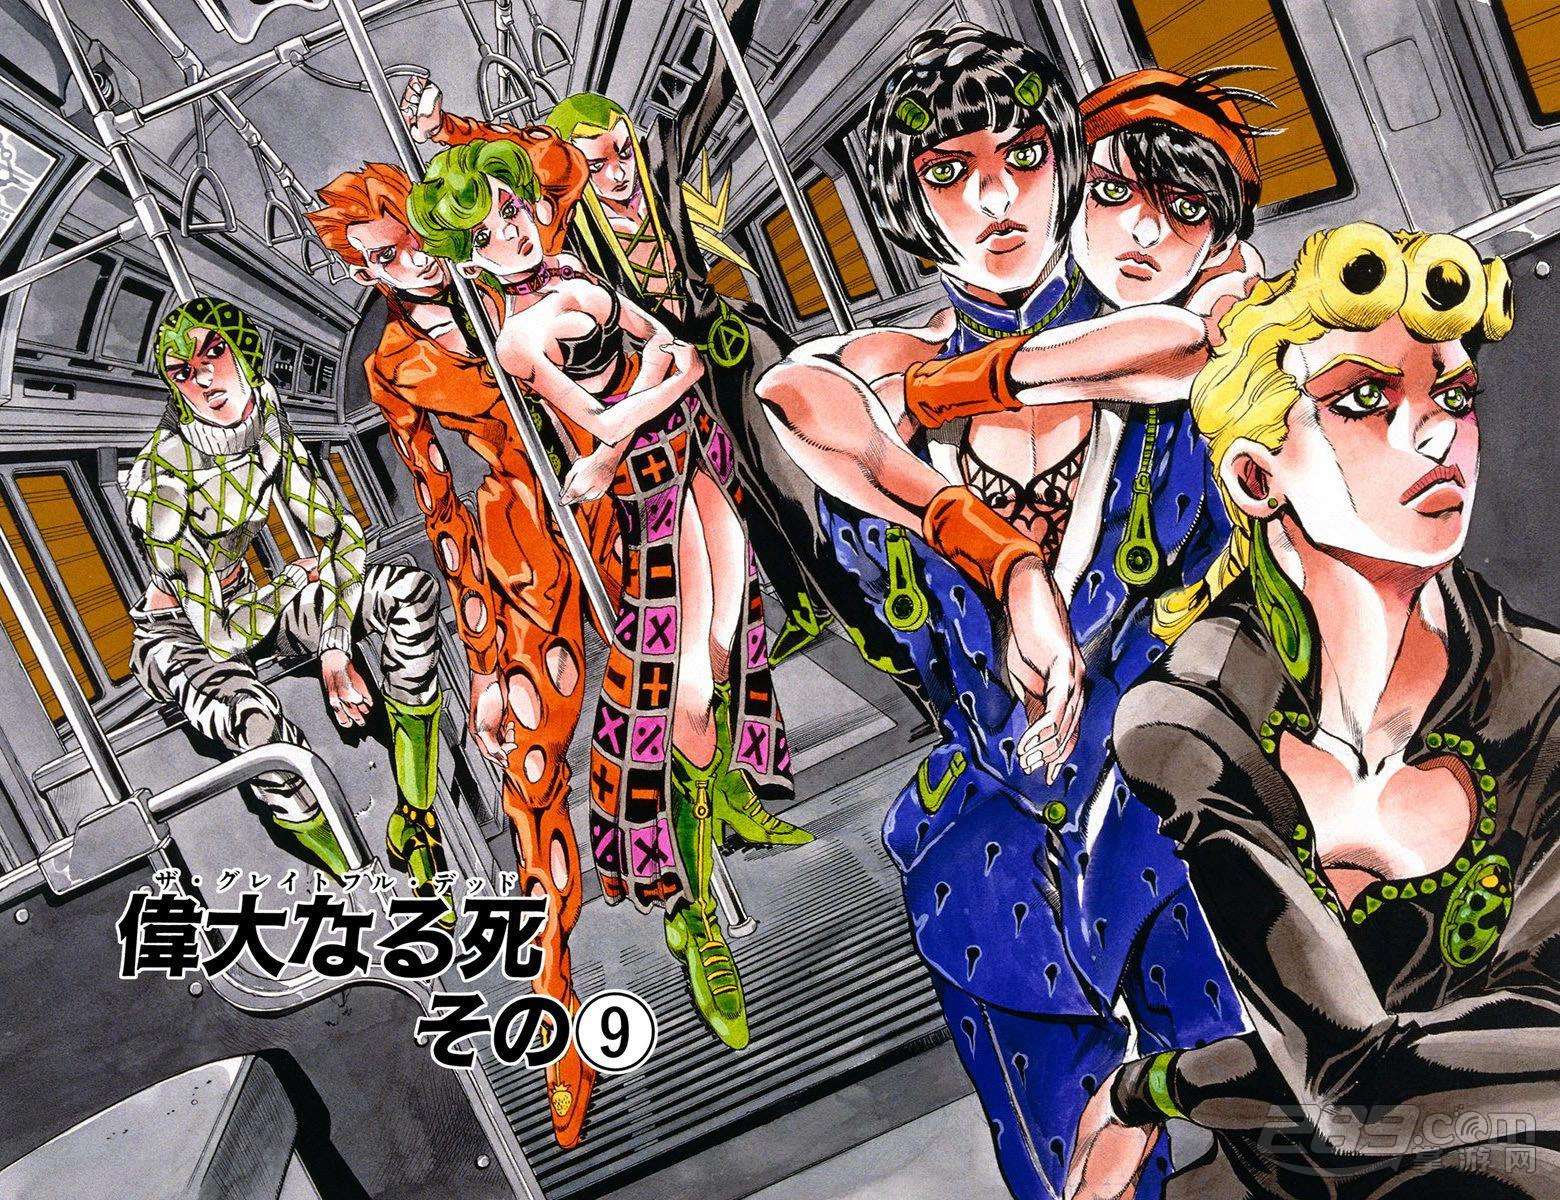 Need some sick part 5 wallpaper